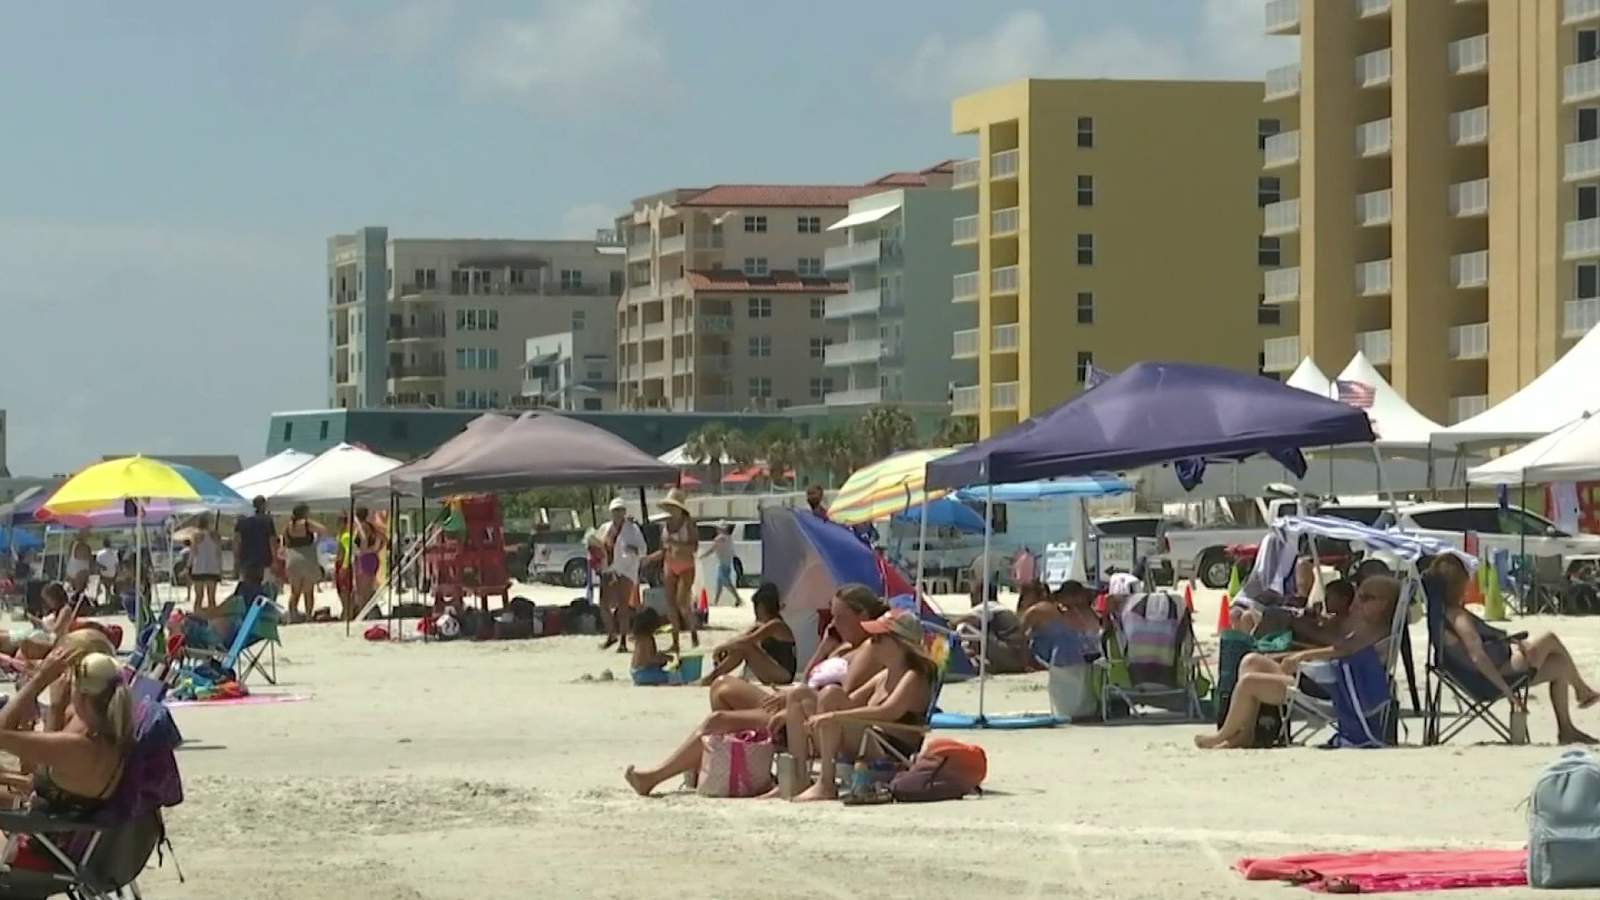 New Smyrna Beach mayor wants beaches to be limited to essential activities only